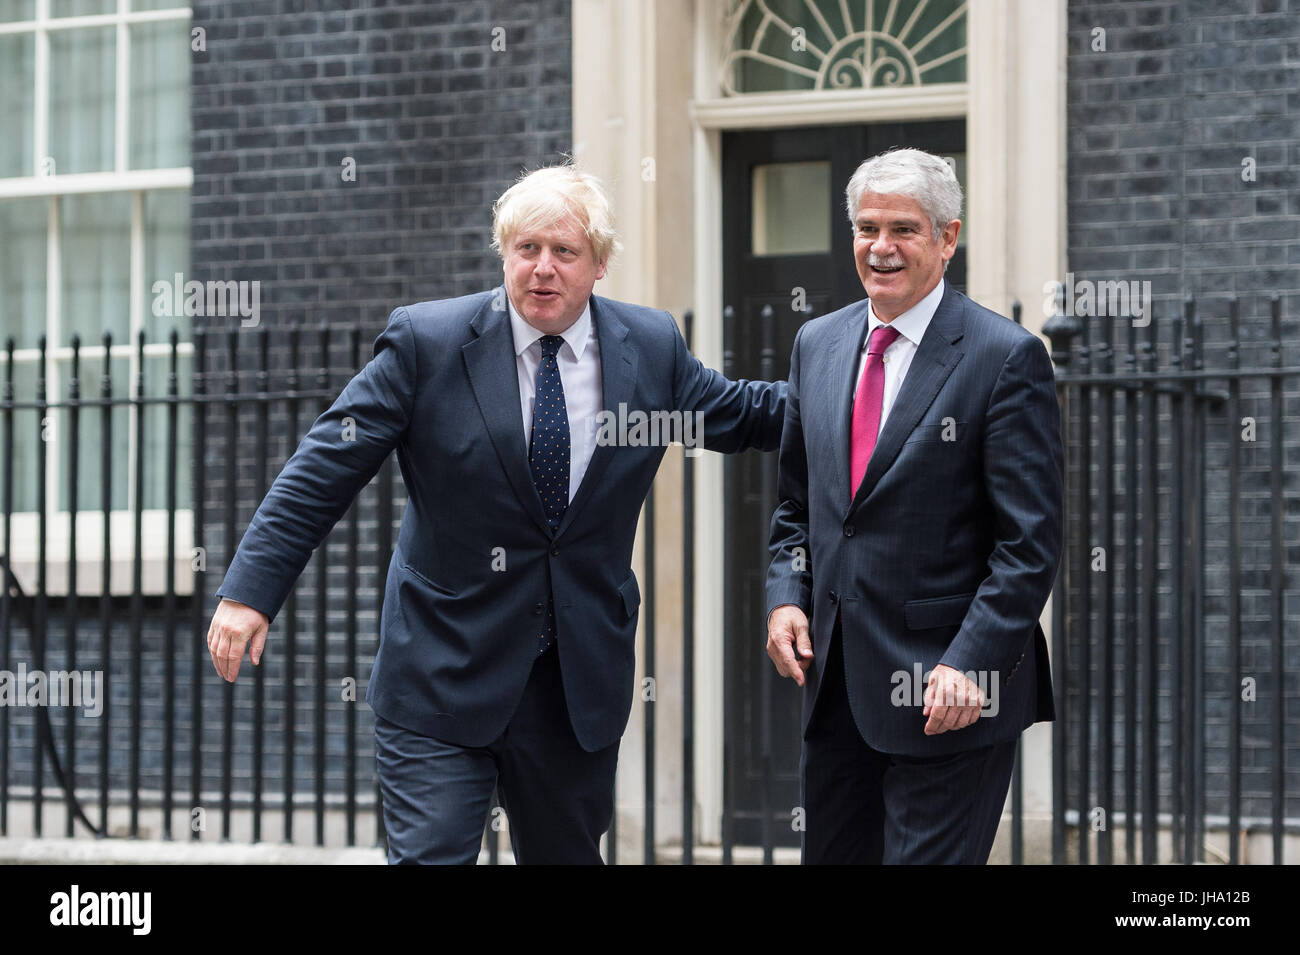 London, UK. 13th July 2017. Boris Johnson, the Secretary of State for Foreign Affairs (L) and Alfonso Dastis, Minister of Foreign Affairs of Spain (R), leave 10 Downing Street after a meeting between British Prime Minister Theresa May and the King Felipe VI of Spain. The King and Queen of Spain pay a state visit to the United Kingdom. Credit: Wiktor Szymanowicz/Alamy Live News Stock Photo